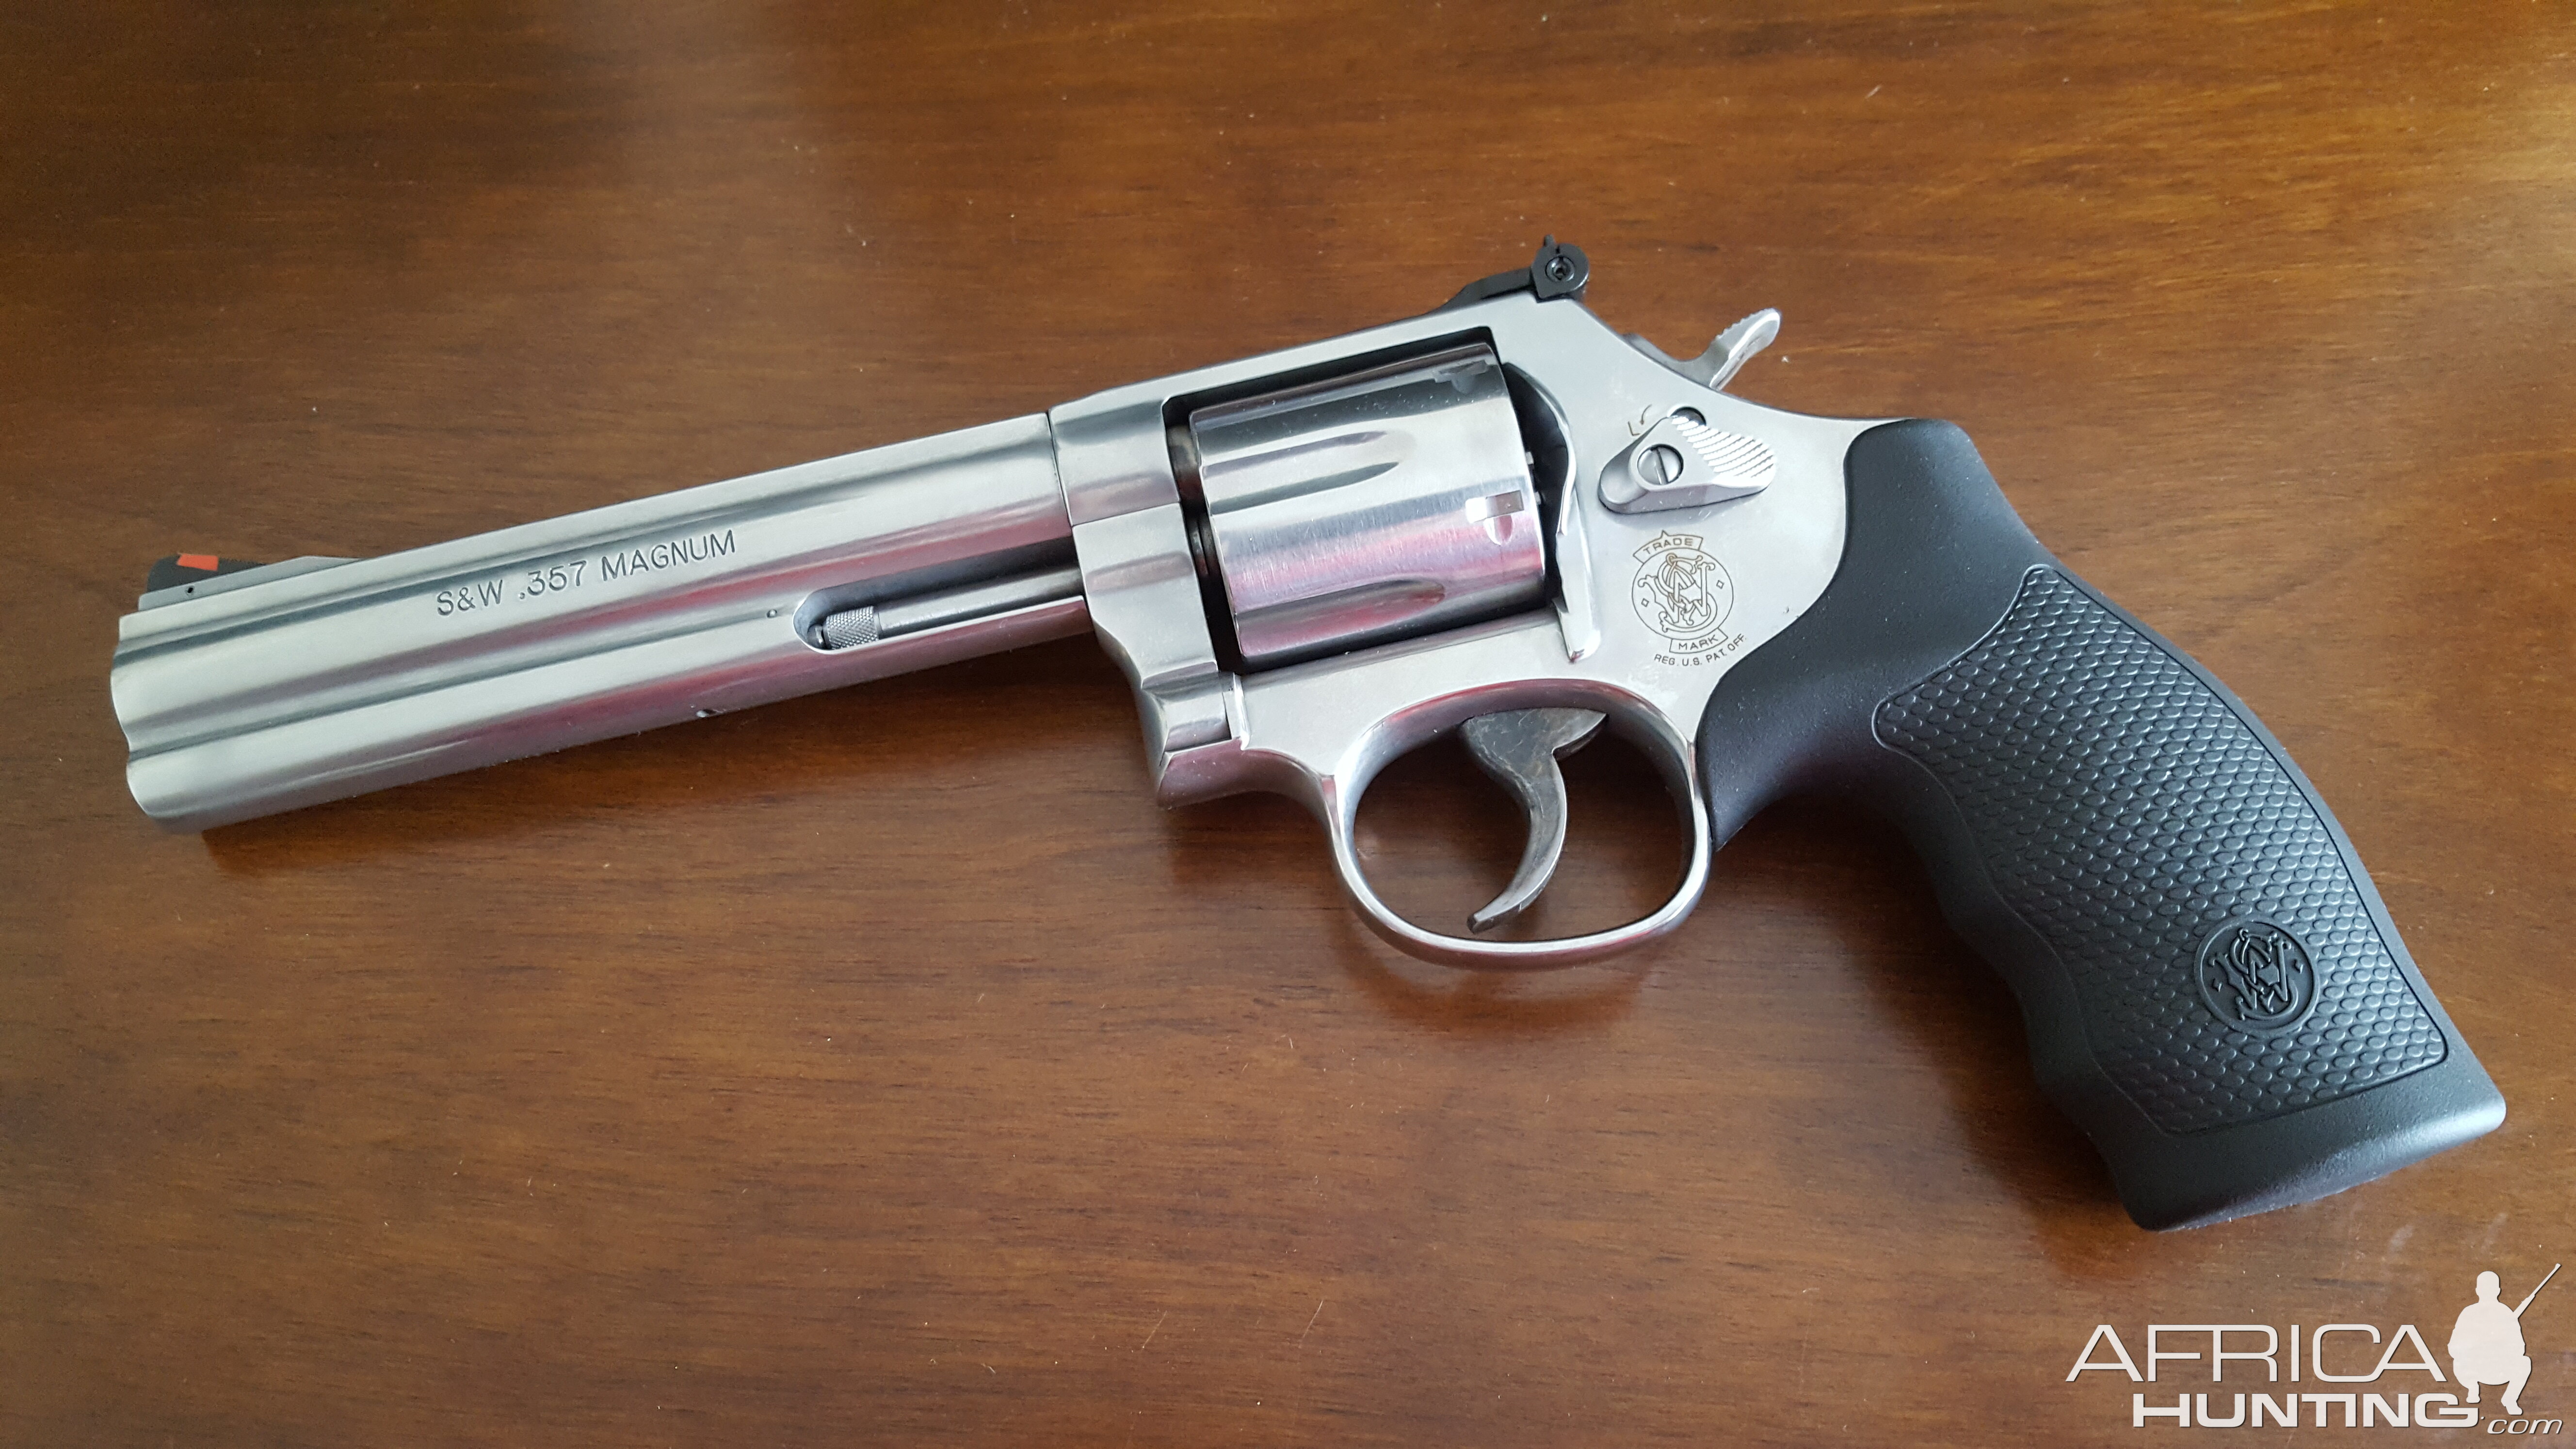 Smith & Wesson 686 revolver chambered in .357 Magnum